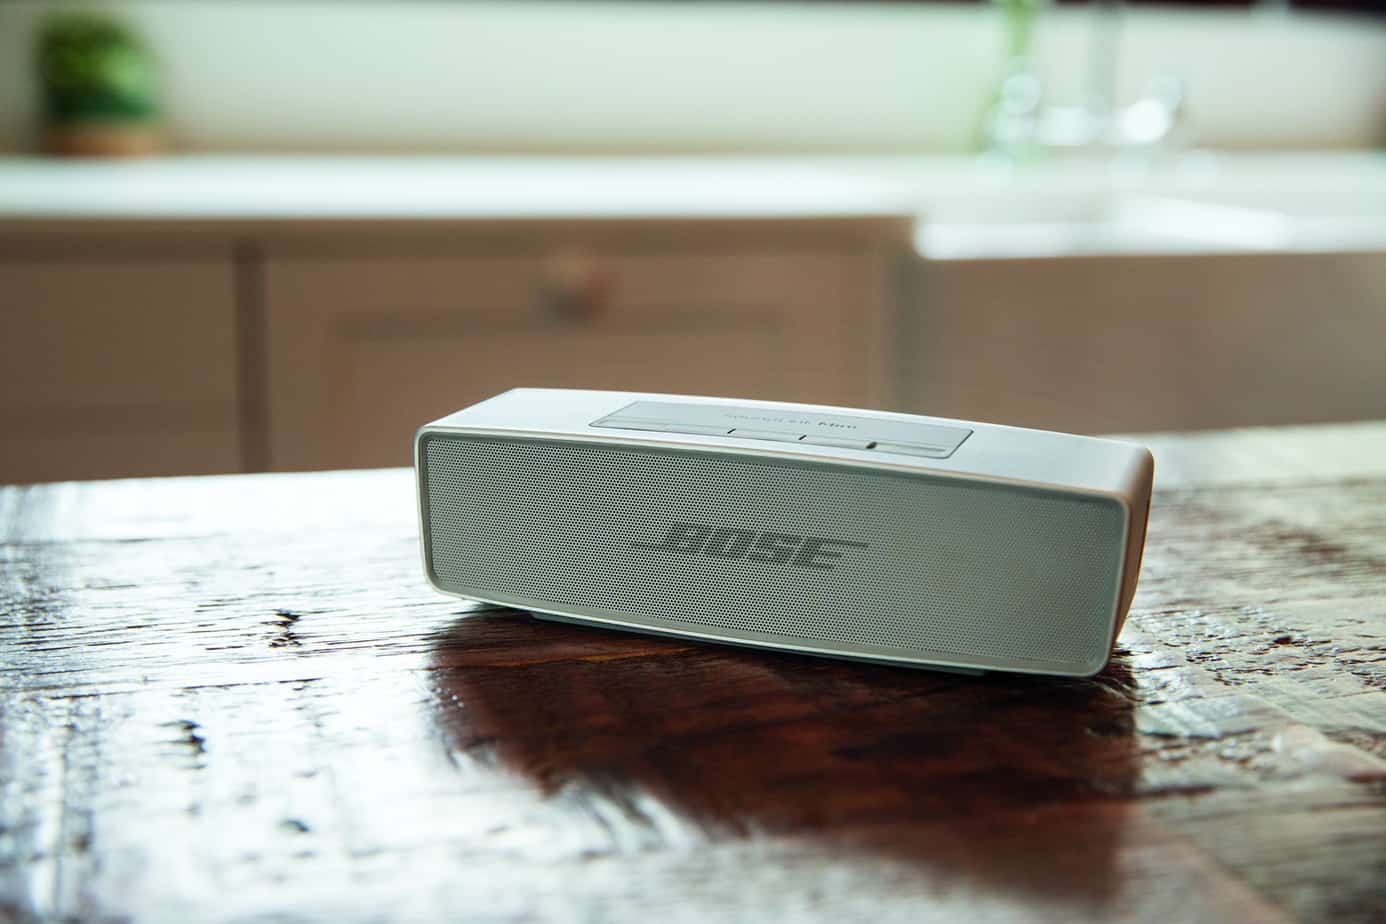 Can You Charge Bose Soundlink Mini with USB?